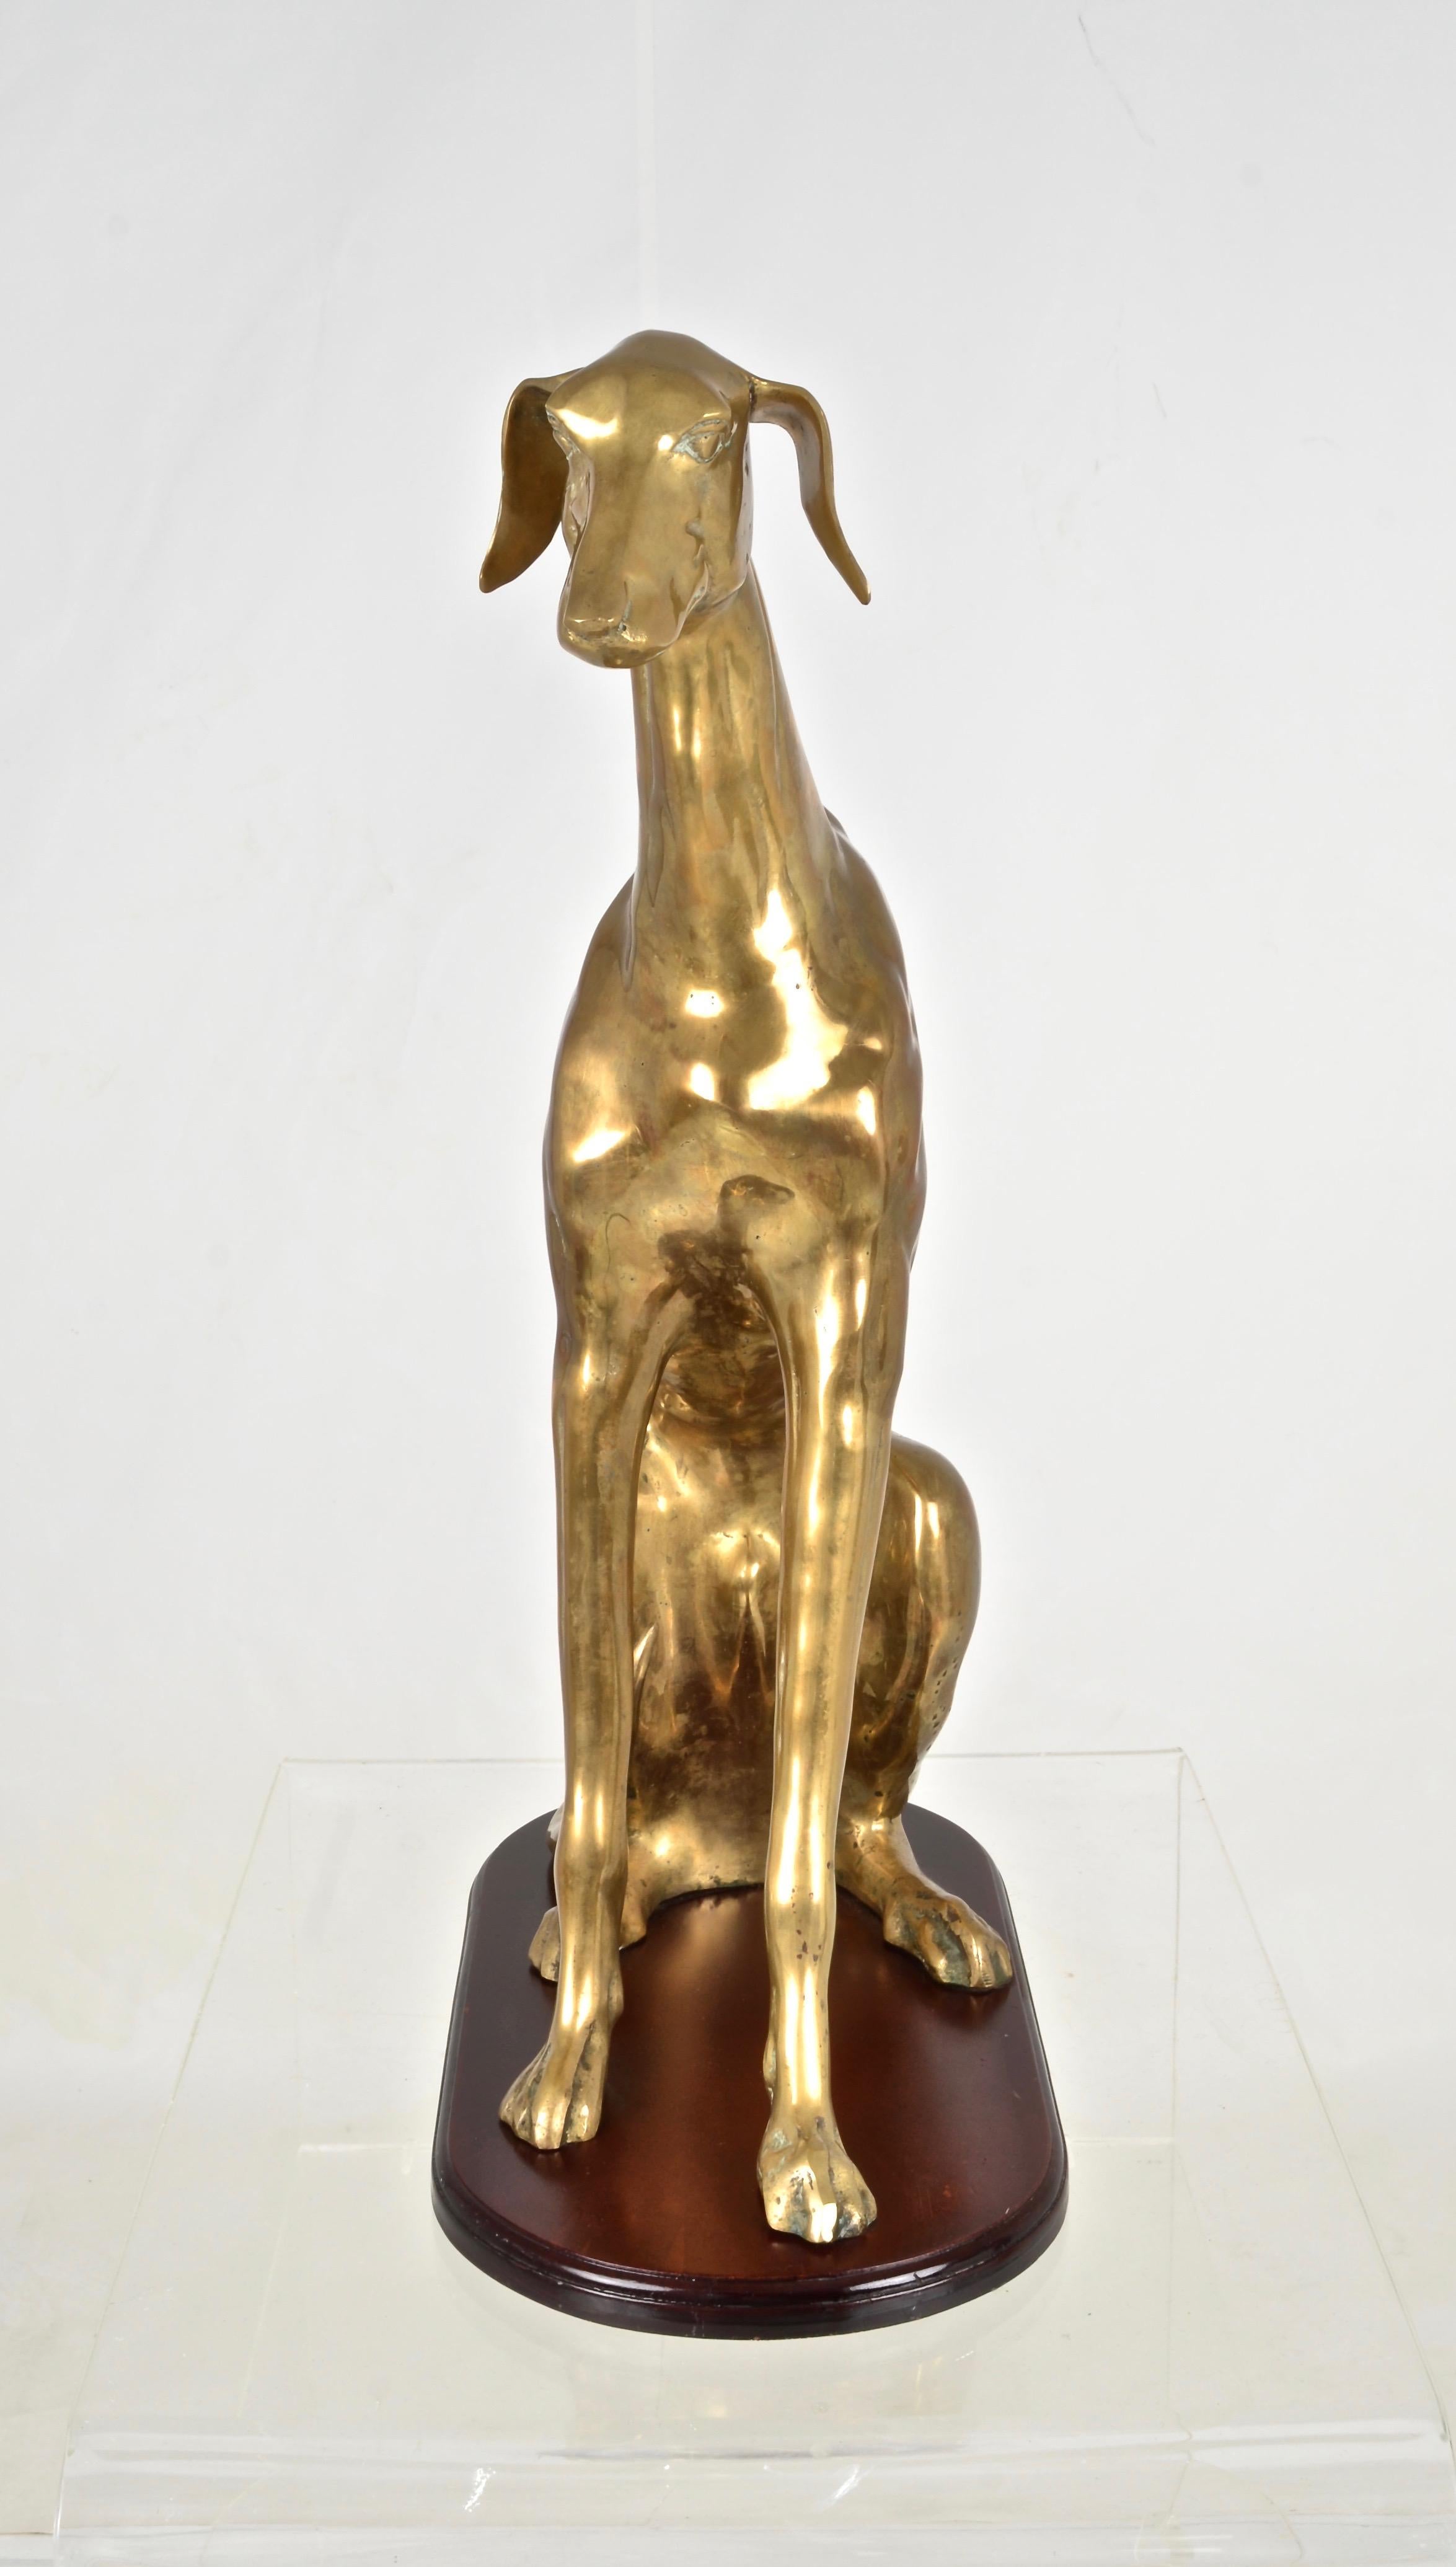 This guy has so much character. We believe he's a whippet. Not starving --just naturally thin (lucky). Wonderful form and attention to detail. The brass dog is mounted on a wood base. Very nice size at 23.5 inch height and 16 inch depth. Brass has